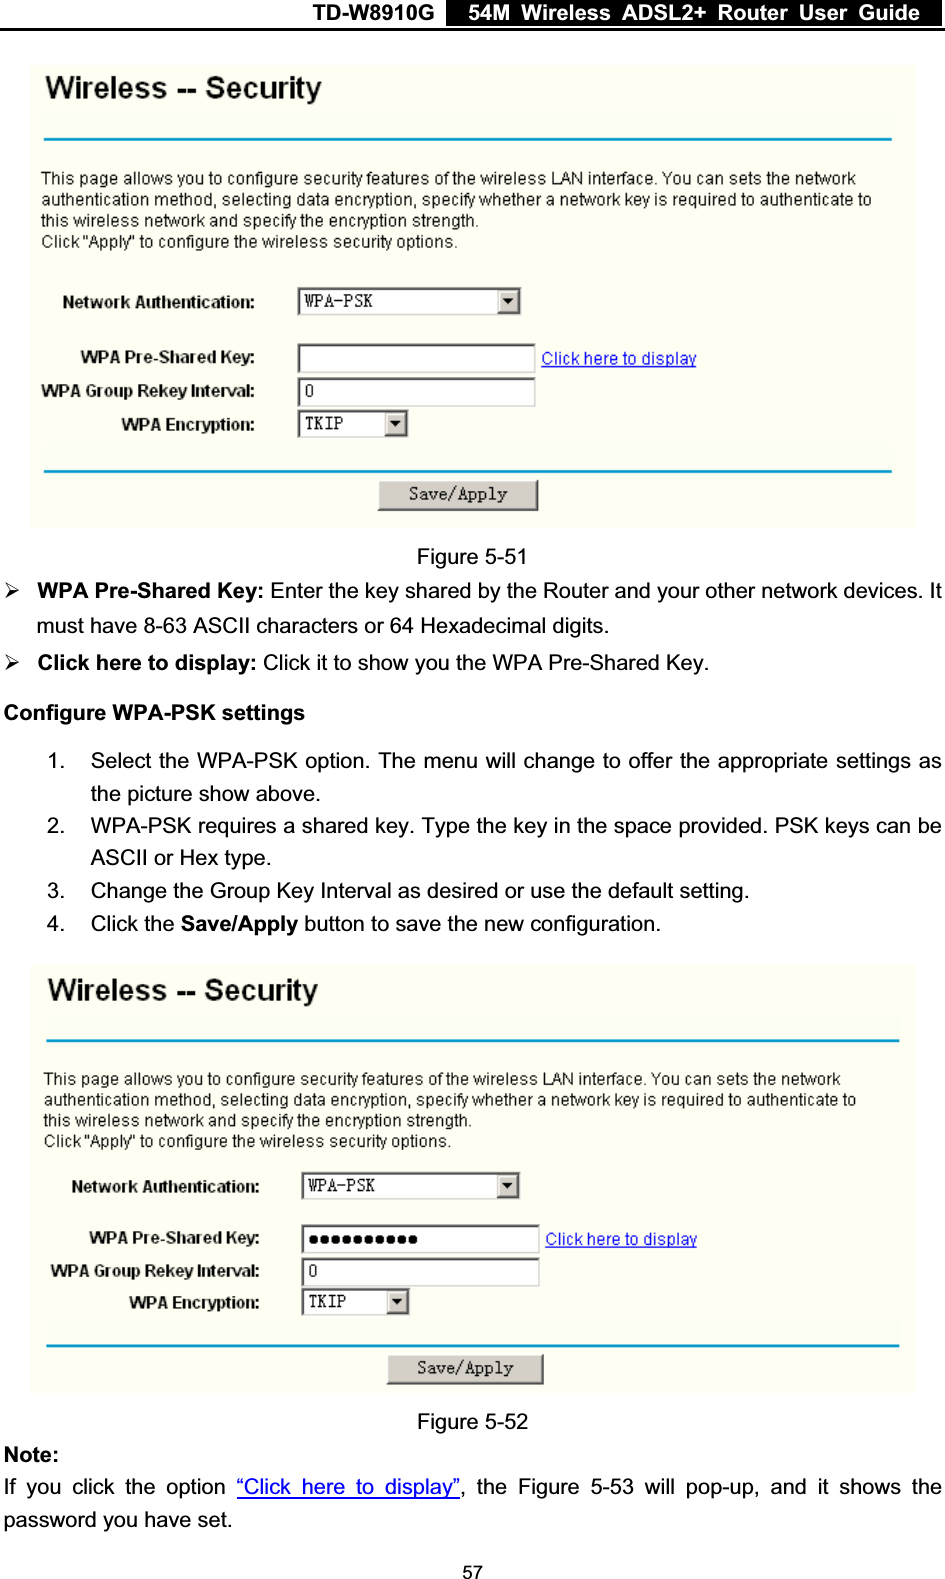 TD-W8910G    54M Wireless ADSL2+ Router User Guide  Figure 5-51¾WPA Pre-Shared Key: Enter the key shared by the Router and your other network devices. It must have 8-63 ASCII characters or 64 Hexadecimal digits. ¾Click here to display: Click it to show you the WPA Pre-Shared Key. Configure WPA-PSK settings 1.  Select the WPA-PSK option. The menu will change to offer the appropriate settings as the picture show above. 2.  WPA-PSK requires a shared key. Type the key in the space provided. PSK keys can be ASCII or Hex type. 3.  Change the Group Key Interval as desired or use the default setting. 4. Click the Save/Apply button to save the new configuration. Figure 5-52 Note:If you click the option “Click here to display”, the Figure 5-53 will pop-up, and it shows the password you have set.  57